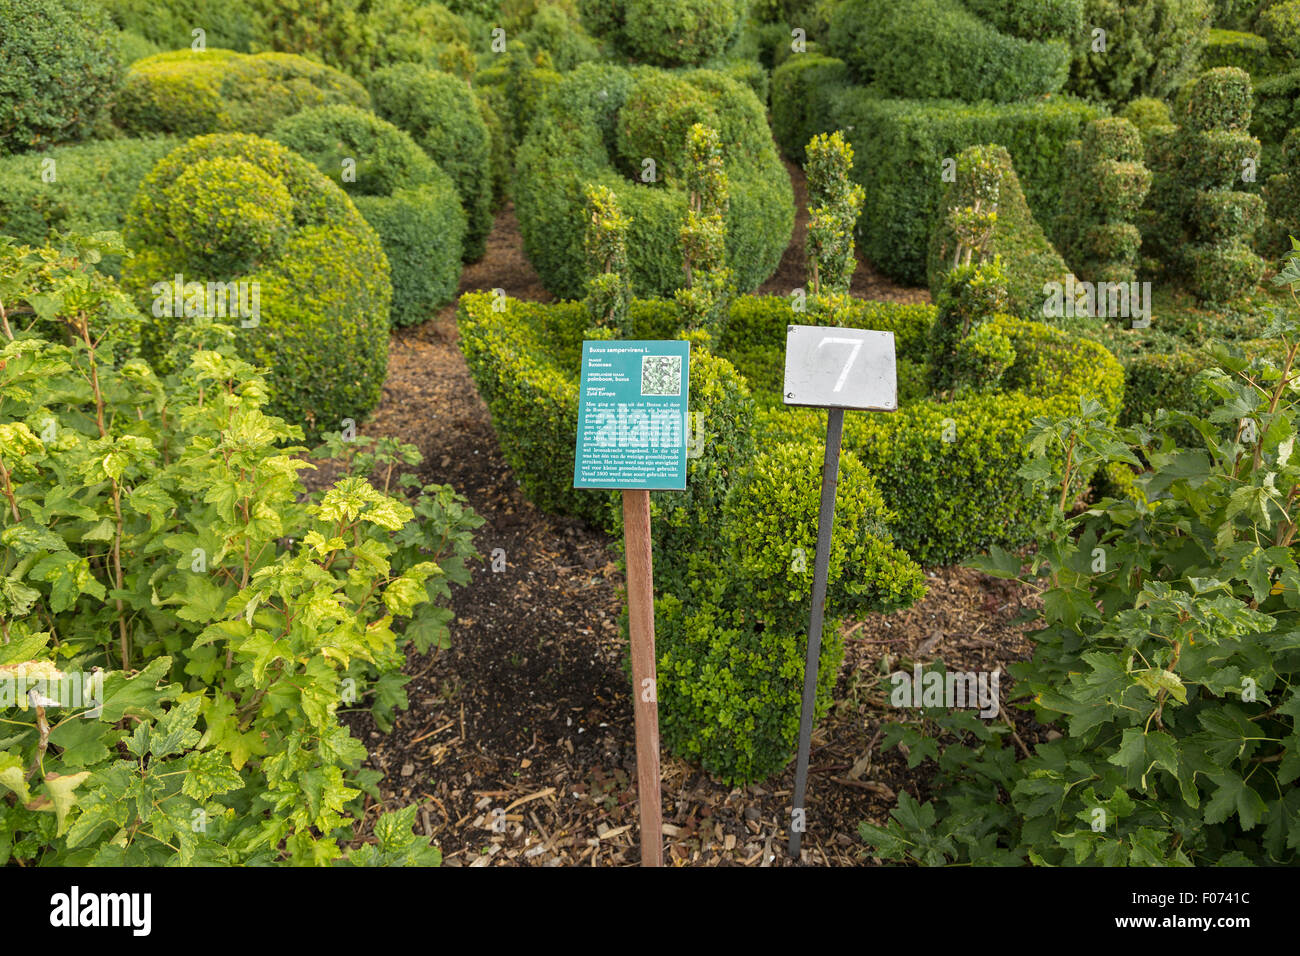 Common Boxwood, Buxus sempervirens in the Historical Garden Aalsmeer, a botanical garden, North Holland, The Netherlands. Stock Photo